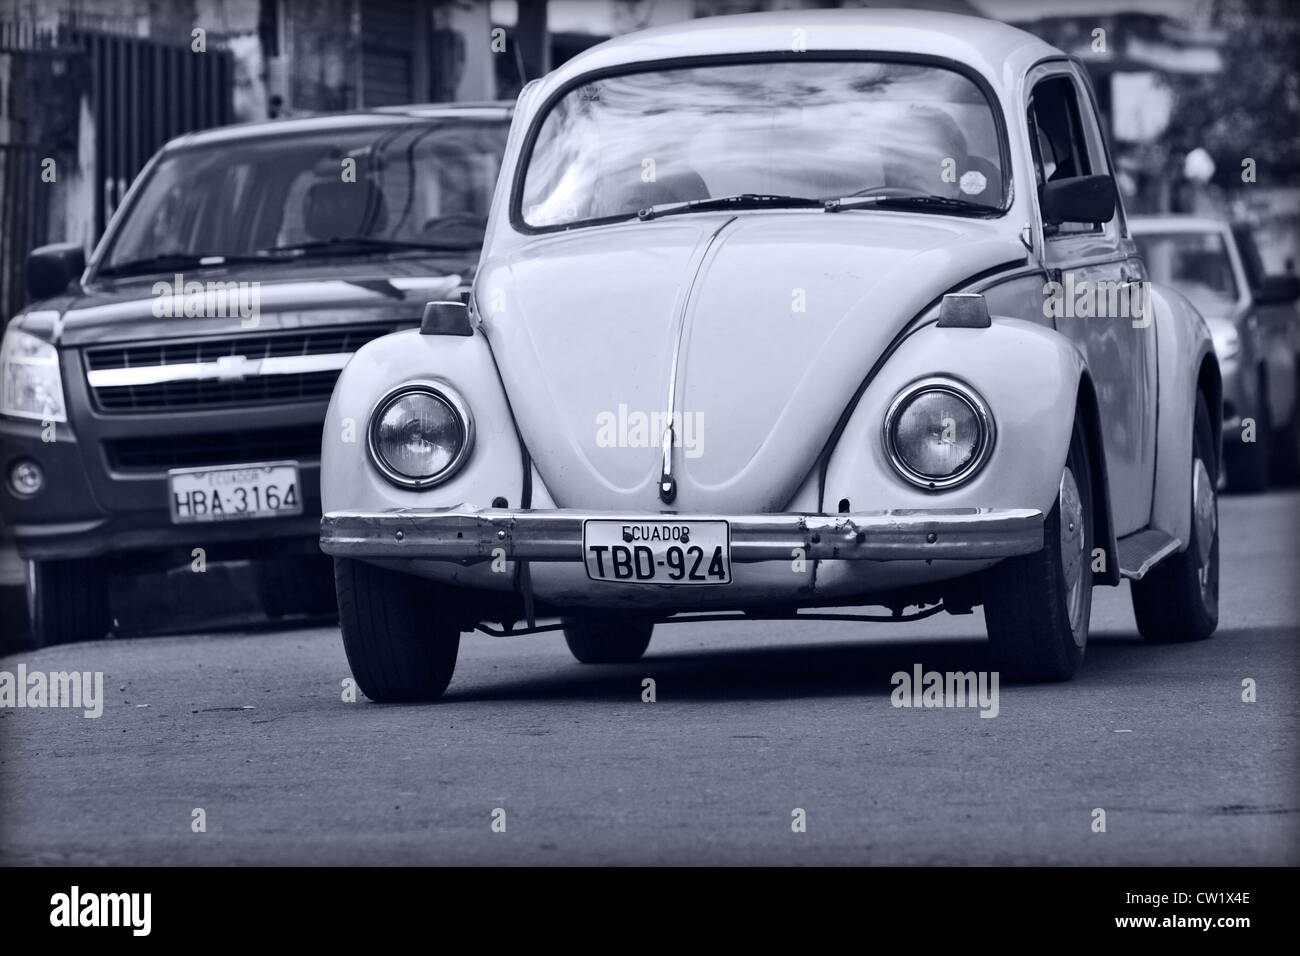 Beetle Was An Economy Car Produced By The German Auto Maker Volkswagen Stock Photo